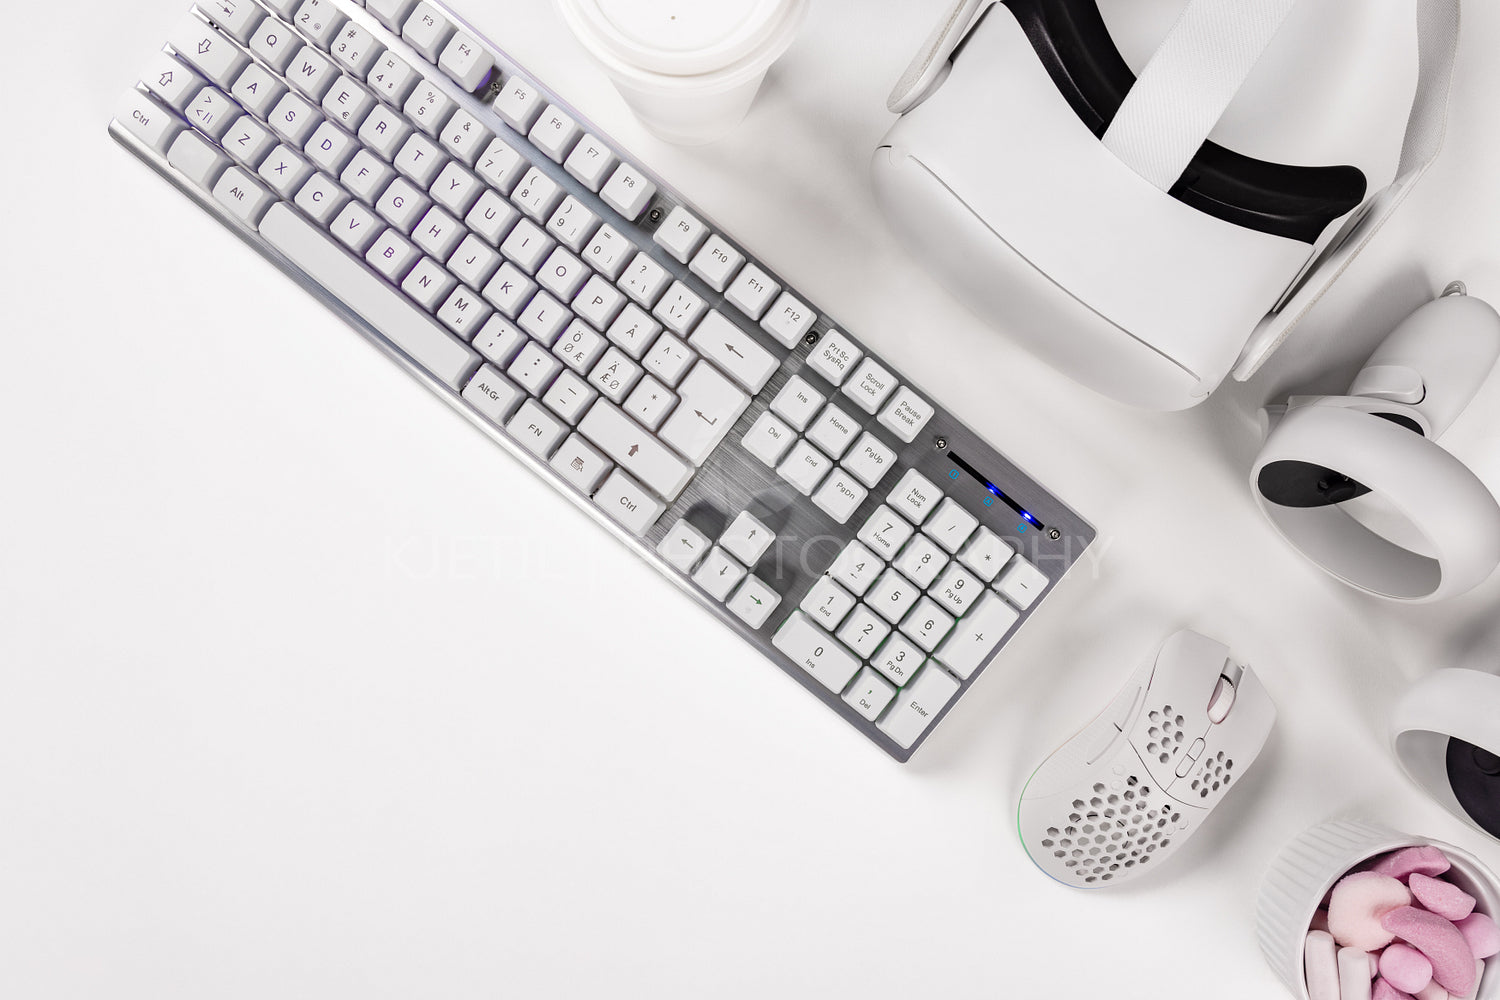 Keyboard with mouse and accessories on white desk